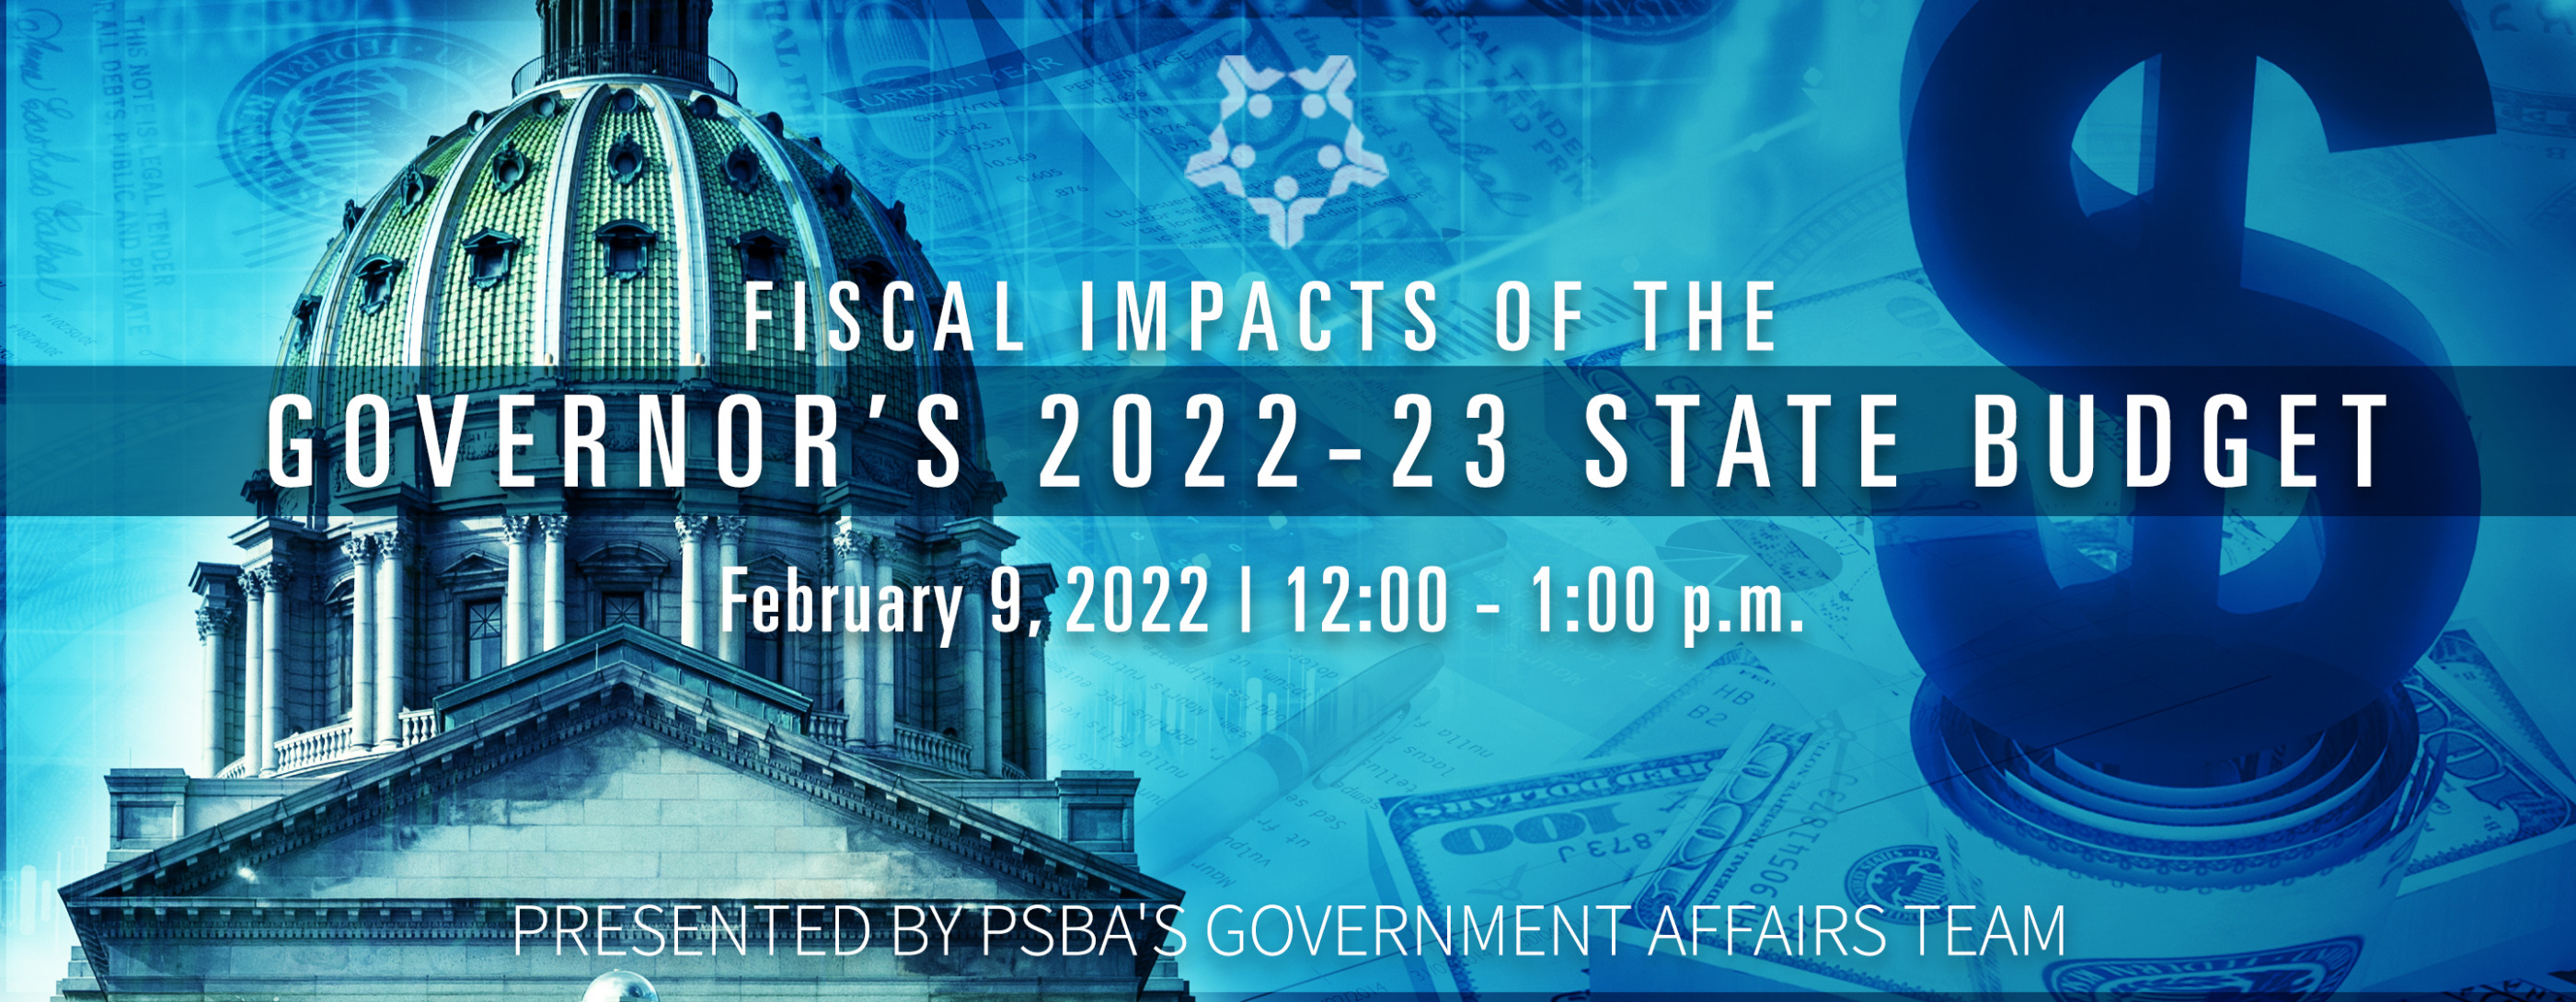 Learn about the Fiscal Impacts of the Governor’s 2022-23 State Budget